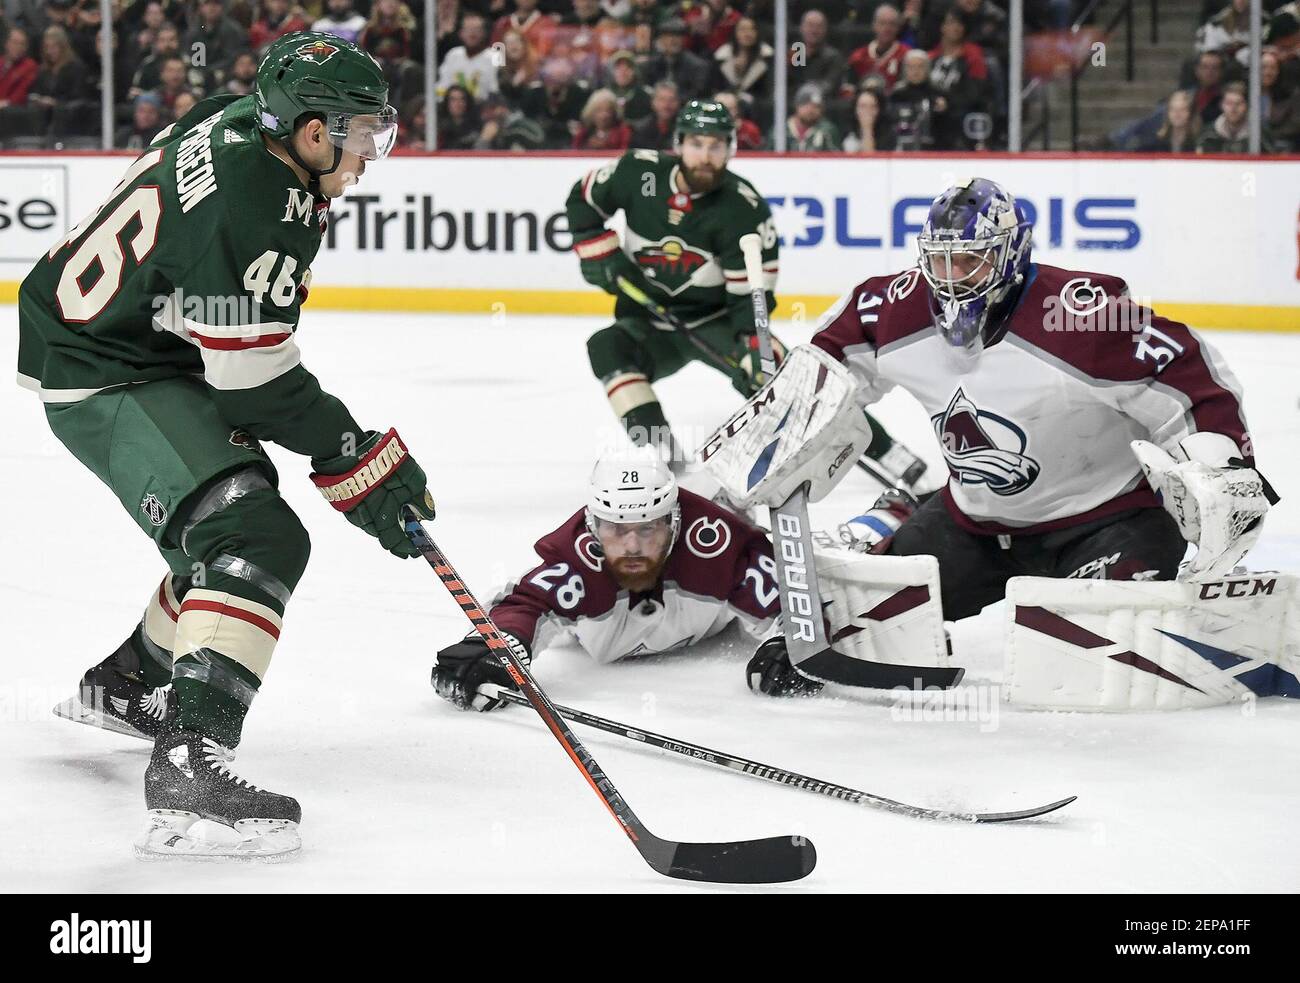 The Minnesota Wild's Jared Spurgeon (46) looks for a shooting opportunity against Colorado Avalanche goaltender Philipp Grubauer (31) as defenseman Ian Cole (28) hits the ice in the first period on Thursday, Nov. 21, 2019, at the Xcel Energy Center in St. Paul, Minn. (Aaron Lavinsky/Minneapolis Star Tribune/TNS) Stock Photo